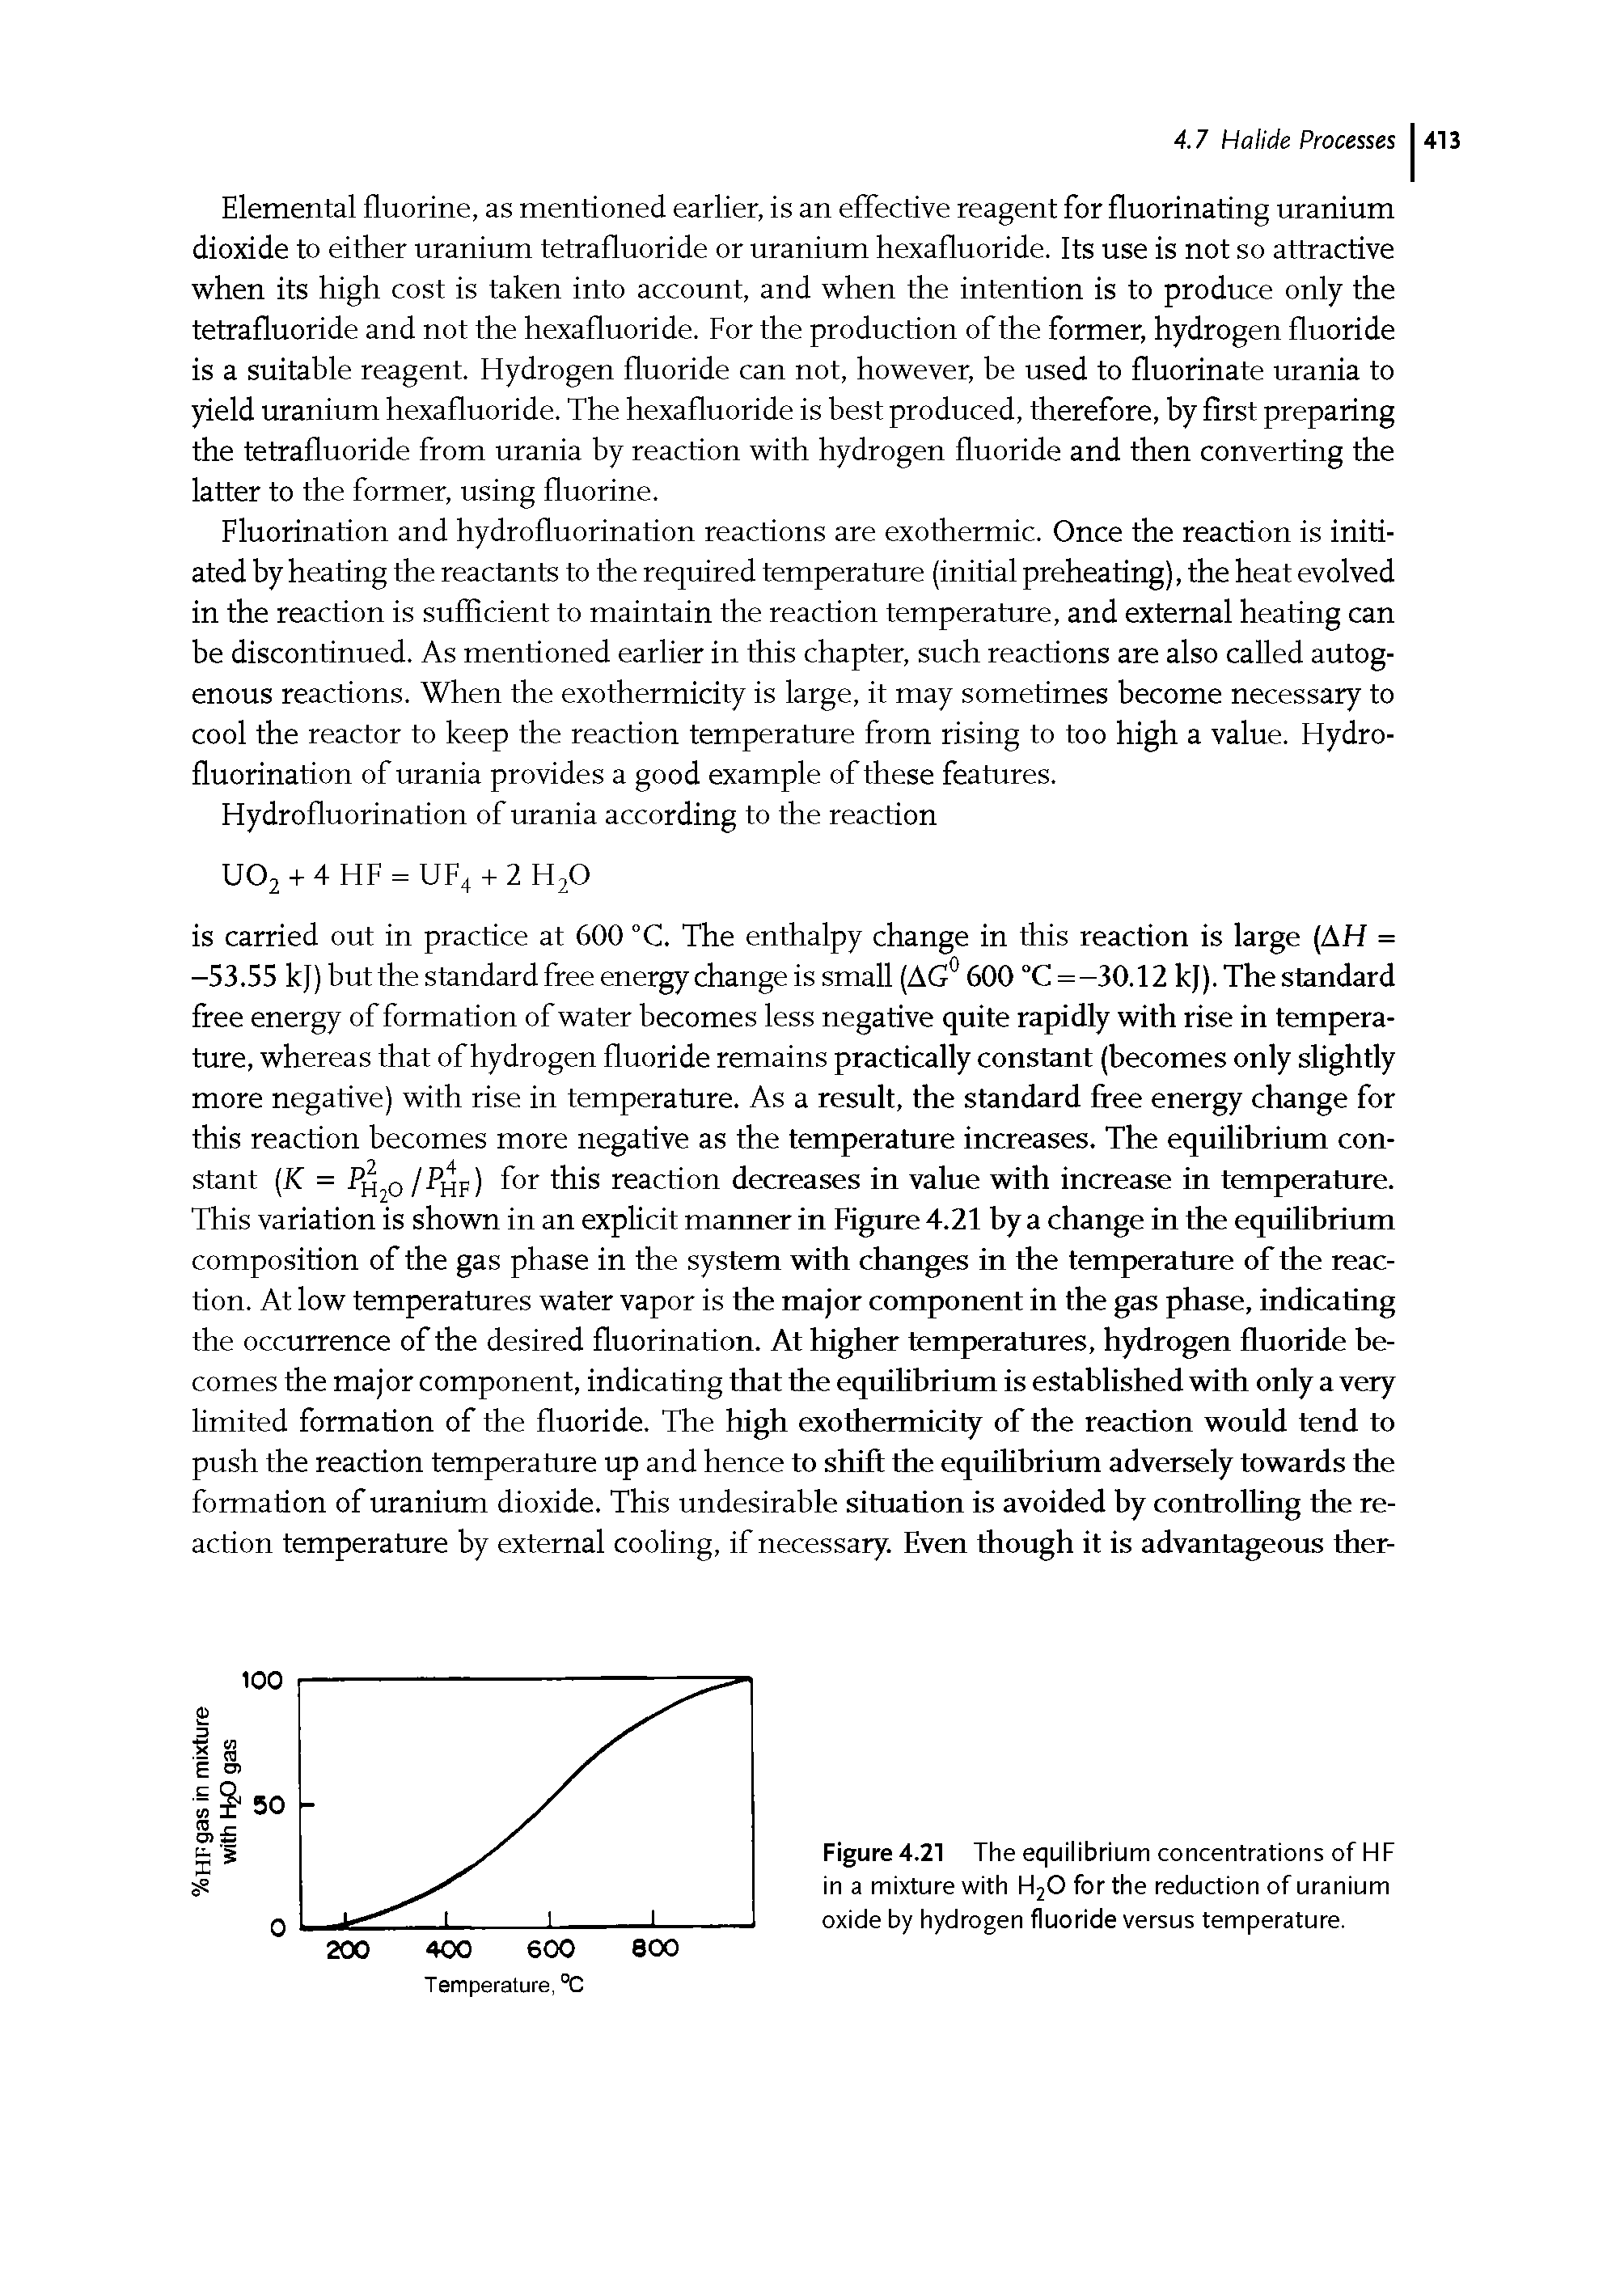 Figure 4.21 The equilibrium concentrations of HF in a mixture with H20 for the reduction of uranium oxide by hydrogen fluoride versus temperature.